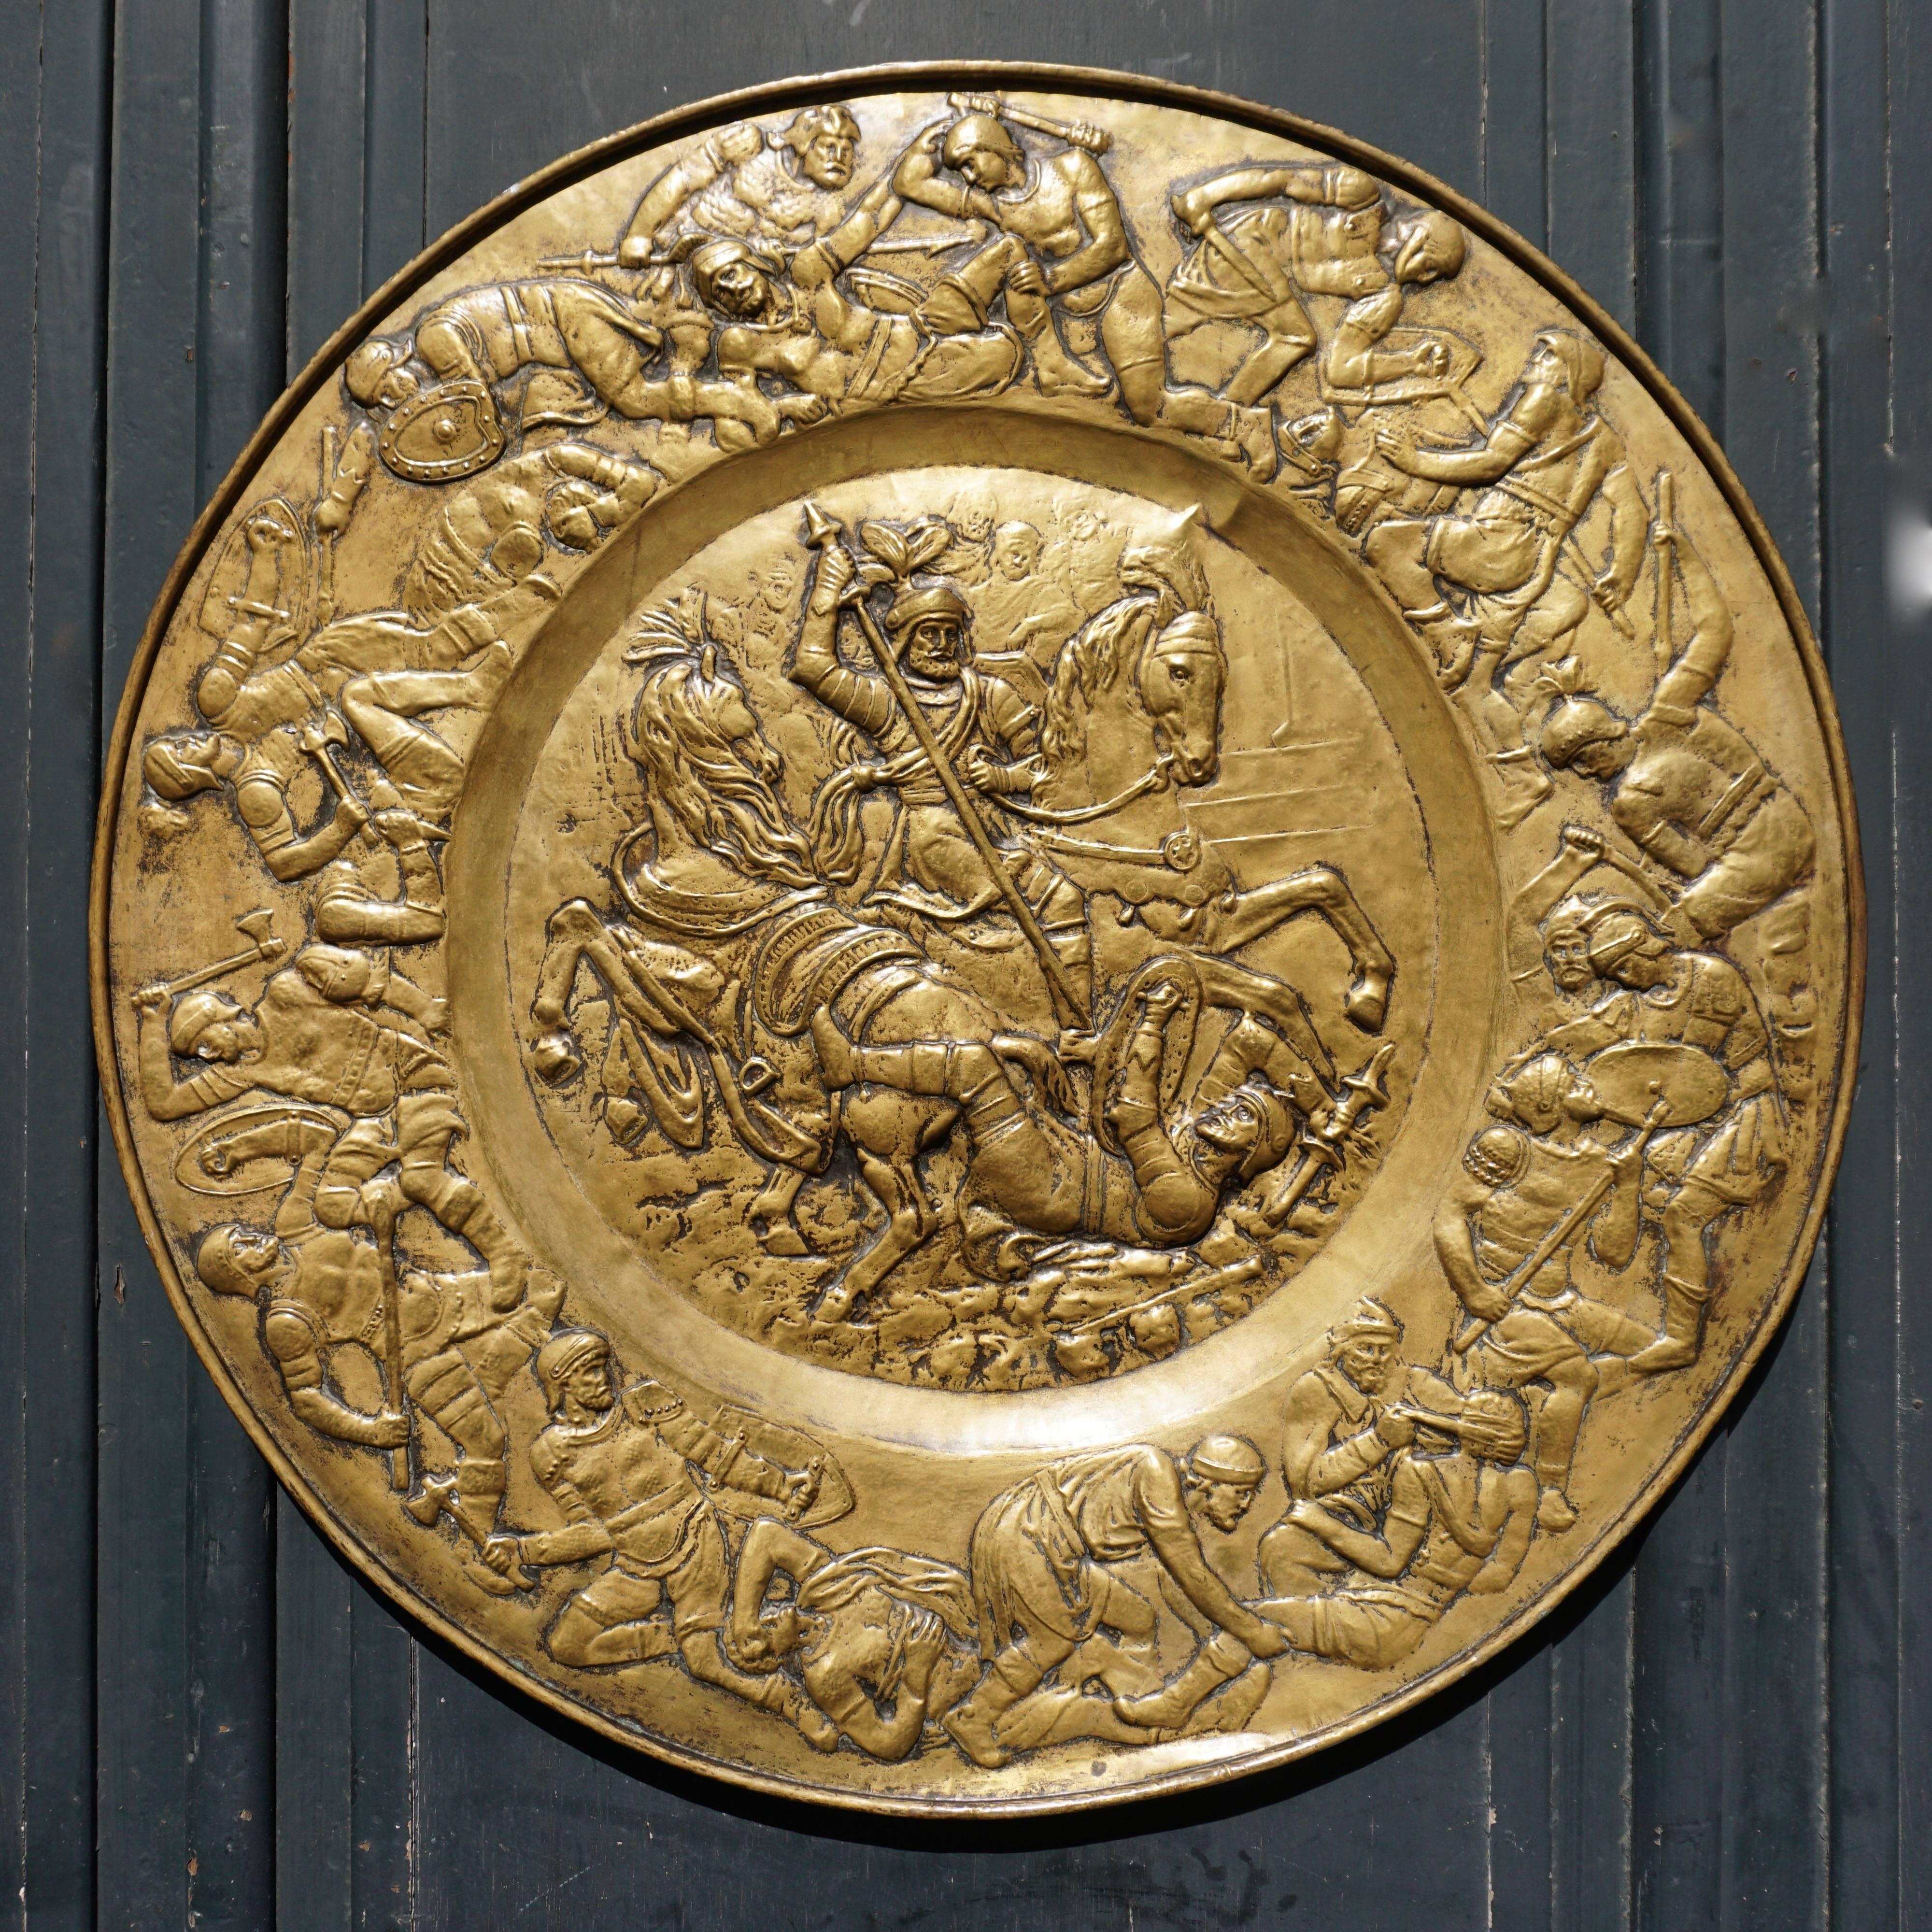 A 19th century hammered brass dish of unusual size in the historical style representing a battle scene between Romans and Barbarians, in the middle fighting generals on horseback, the frieze surrounding them showing infantry engaged in battle and